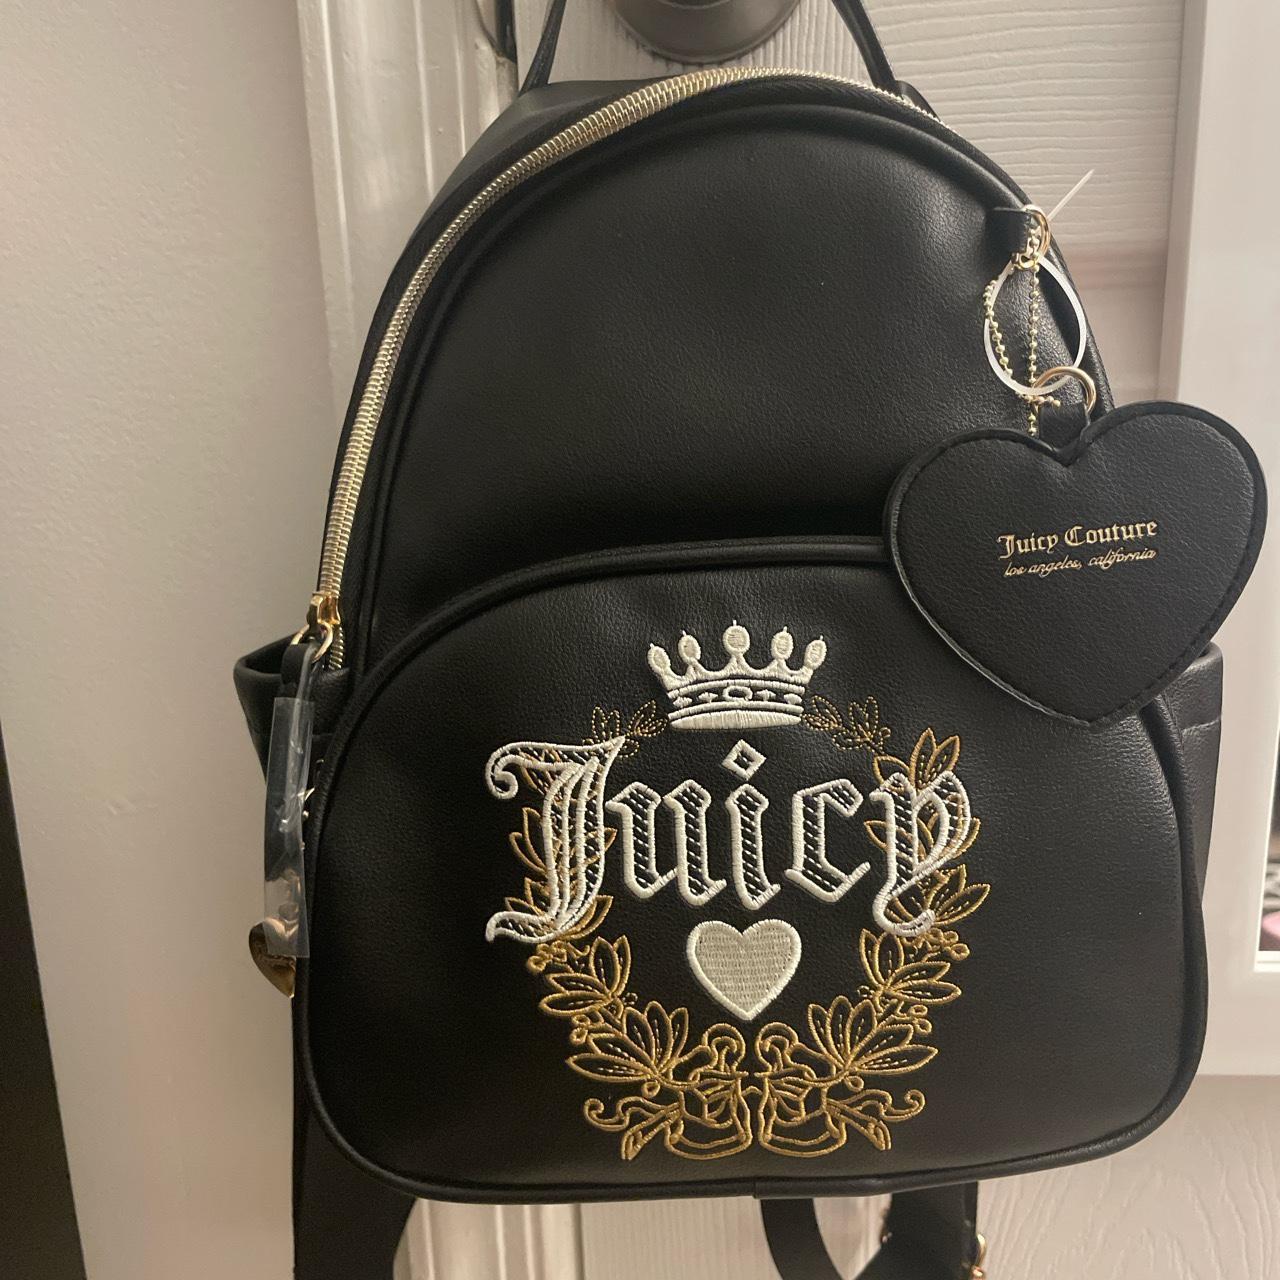 Juicy Couture New Mini Backpack in Pink